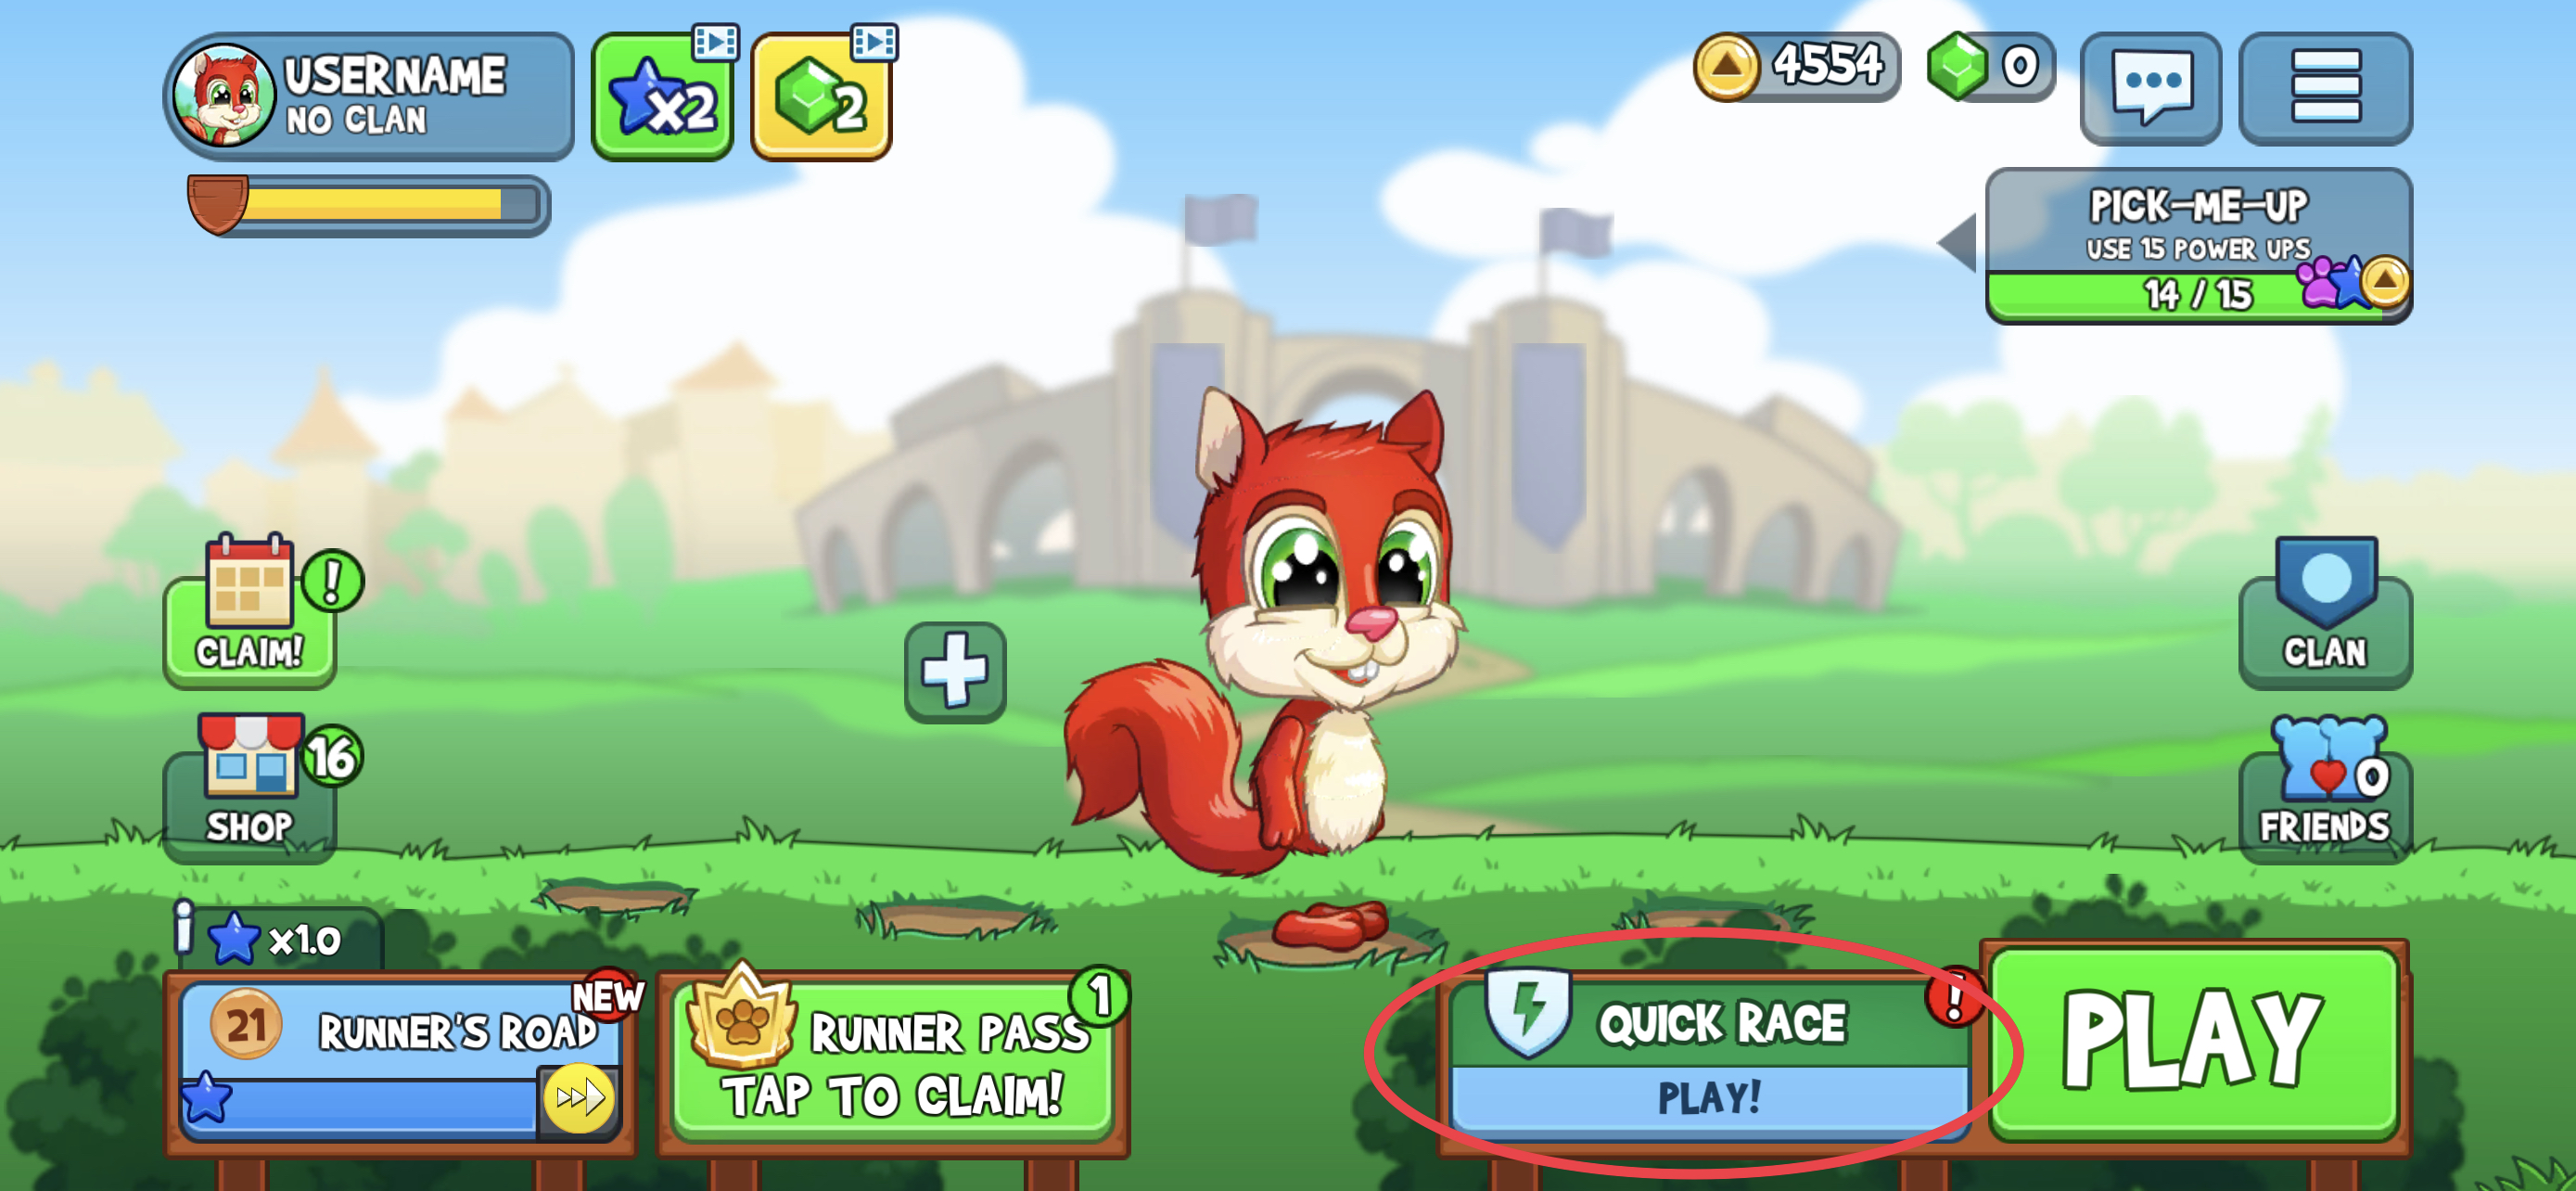 How Fun Run topped the App Store with $0 marketing budget